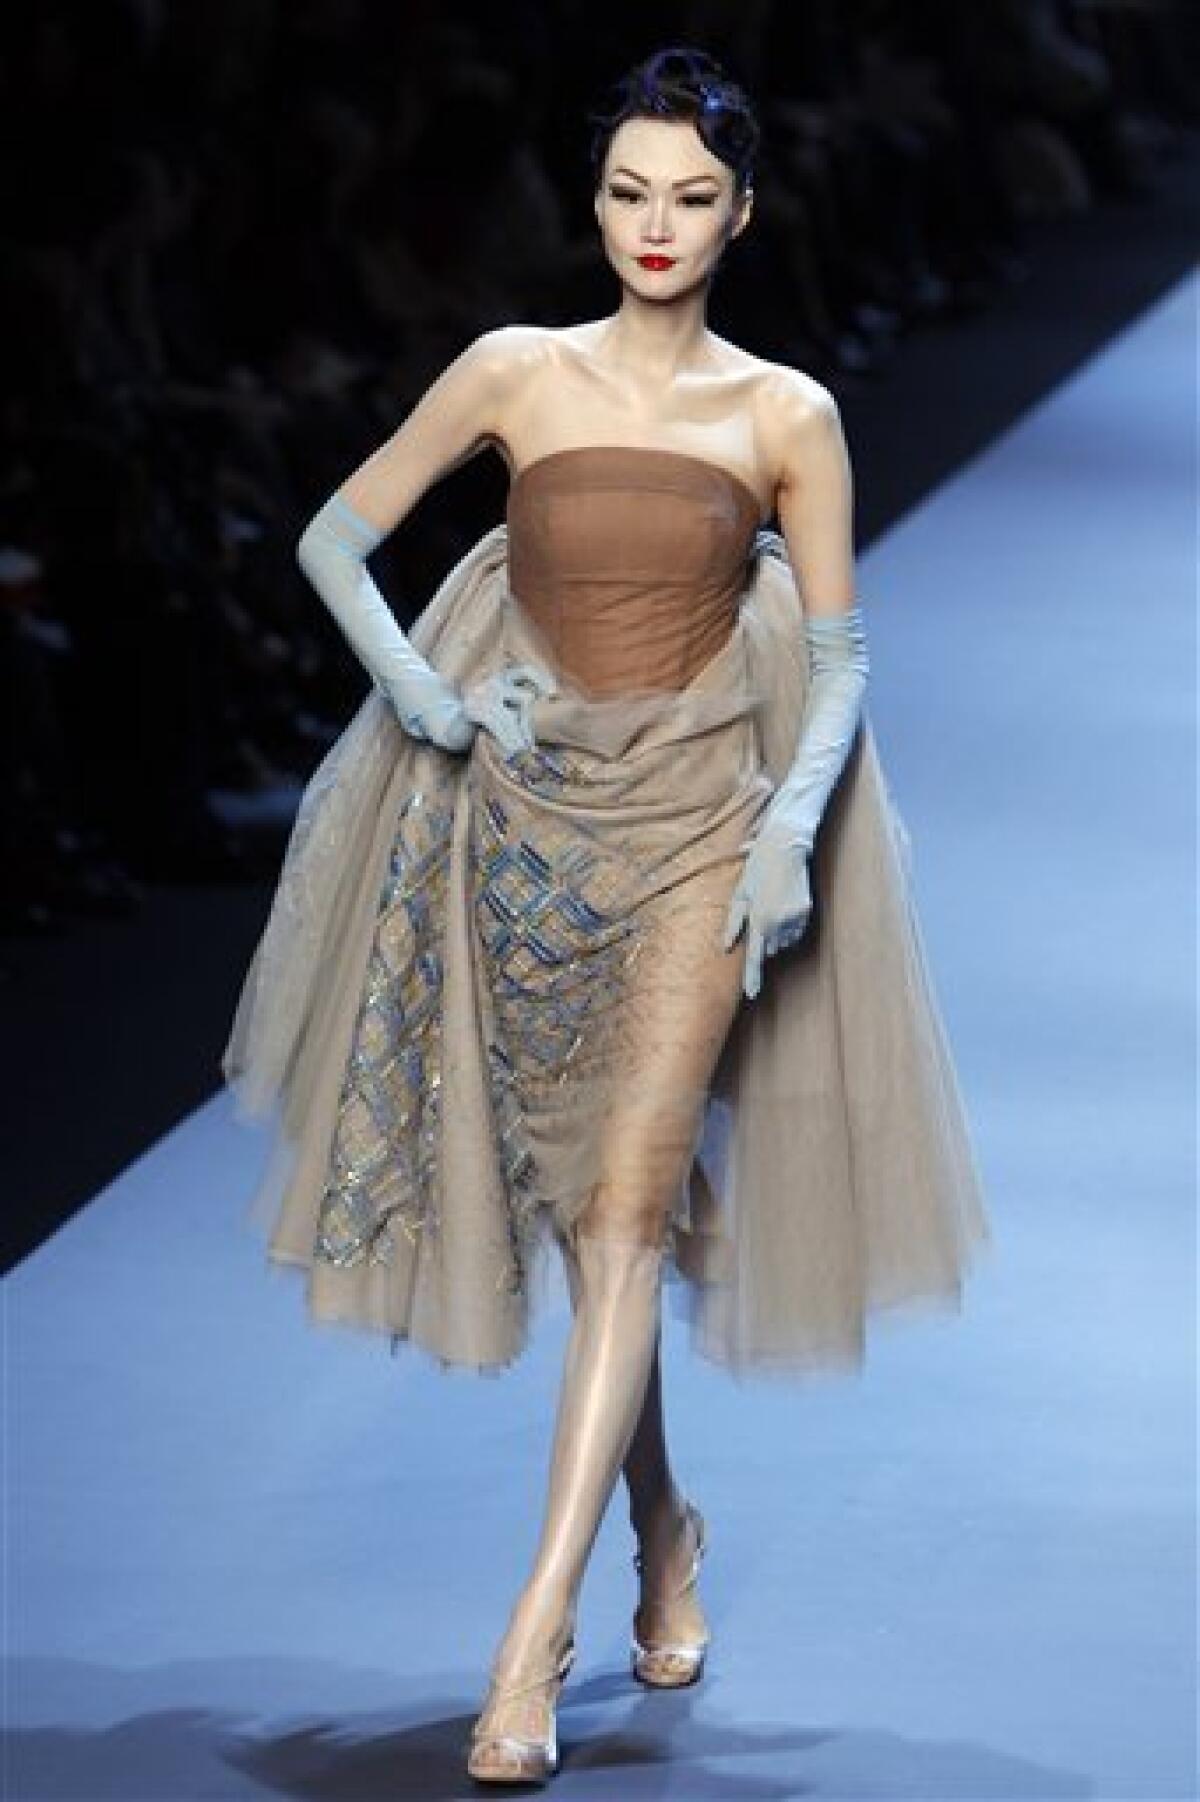 A model wears a creation by British fashion designer John Galliano for Dior's Haute Couture Spring Summer 2011 fashion collection presented in Paris, Monday, Jan. 24, 2011. (AP Photo/ Francois Mori)